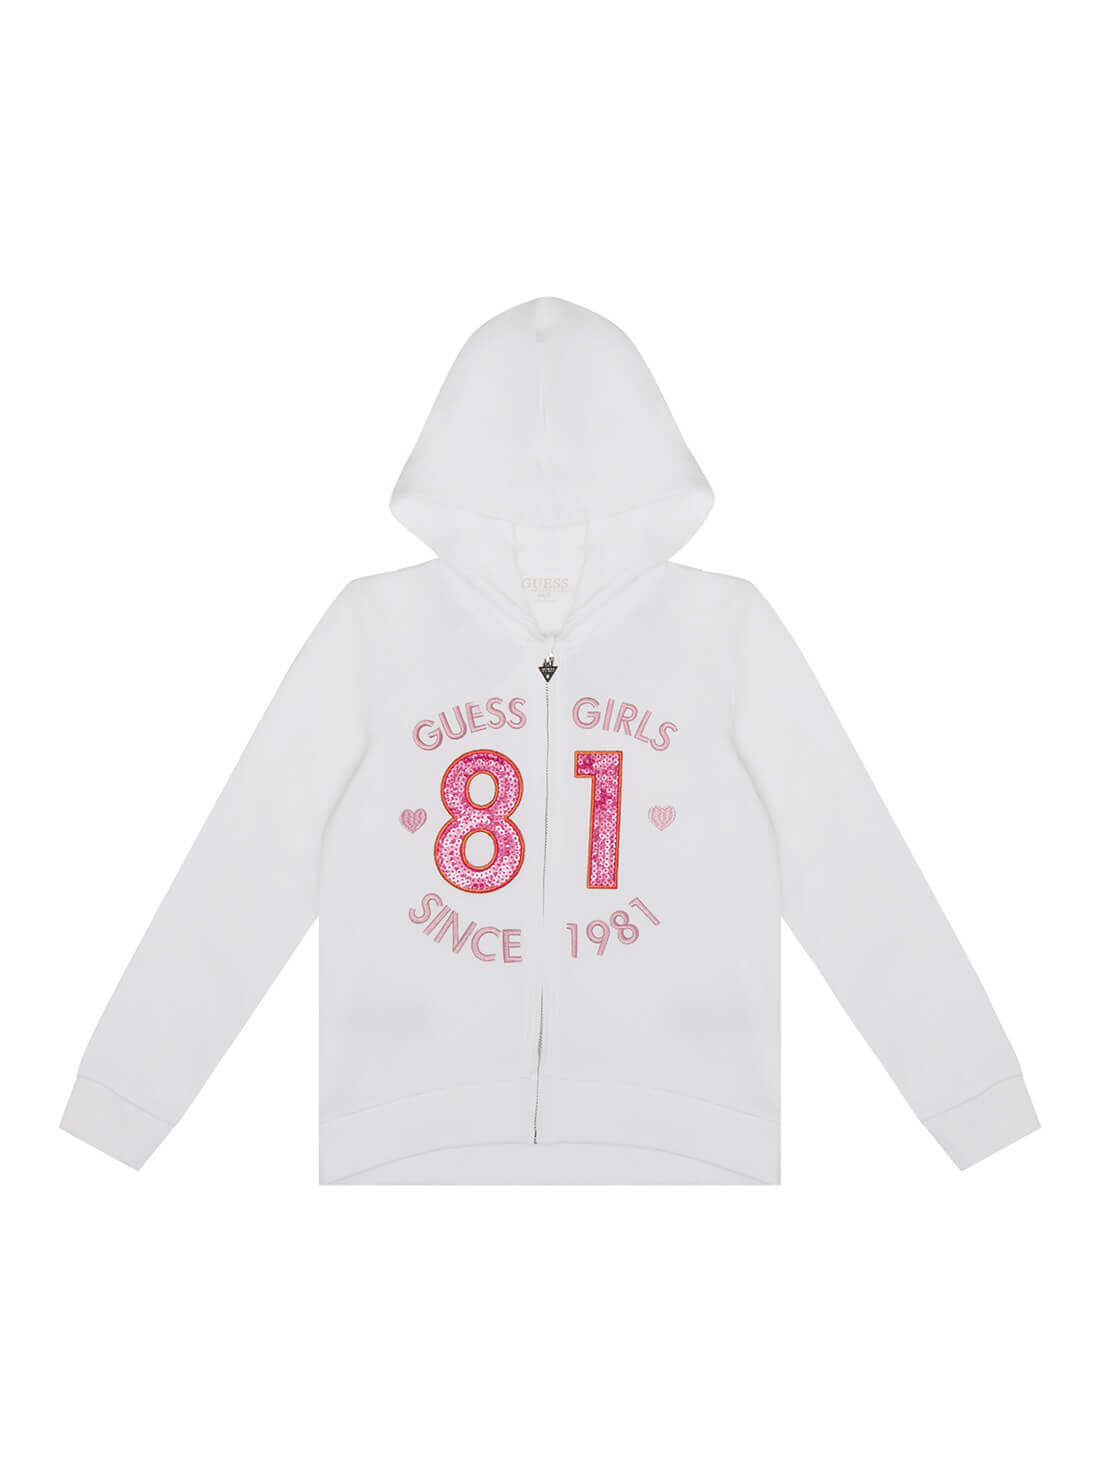 GUESS Kids Pure White 81 Zip Hoodie (2-7) Front View